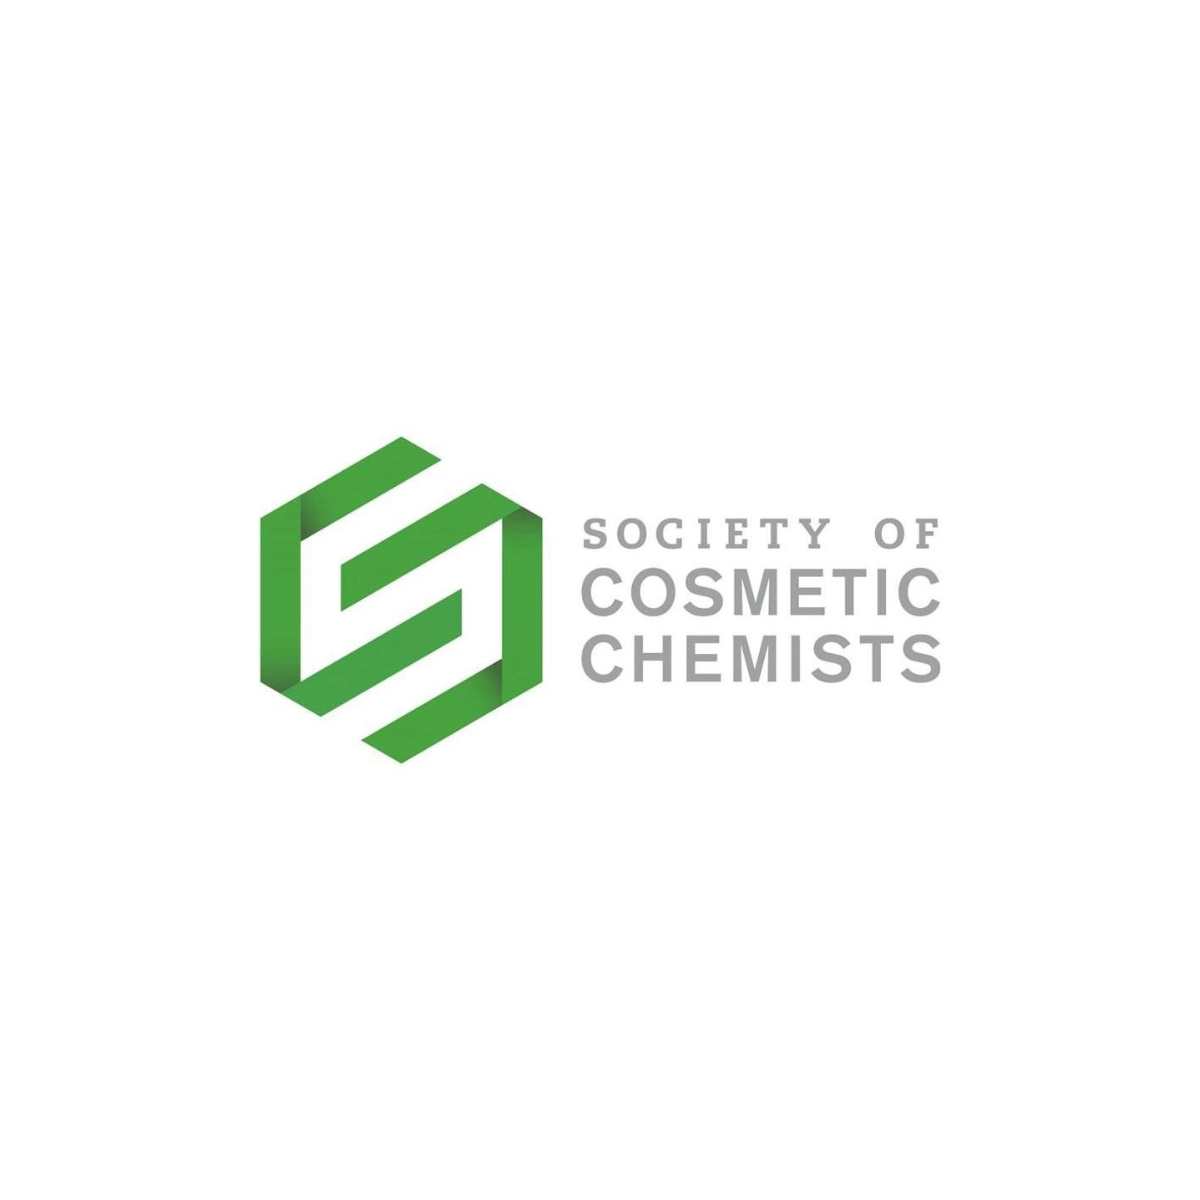 Emily Fritchey is a member of the Society of Cosmetic Chemist